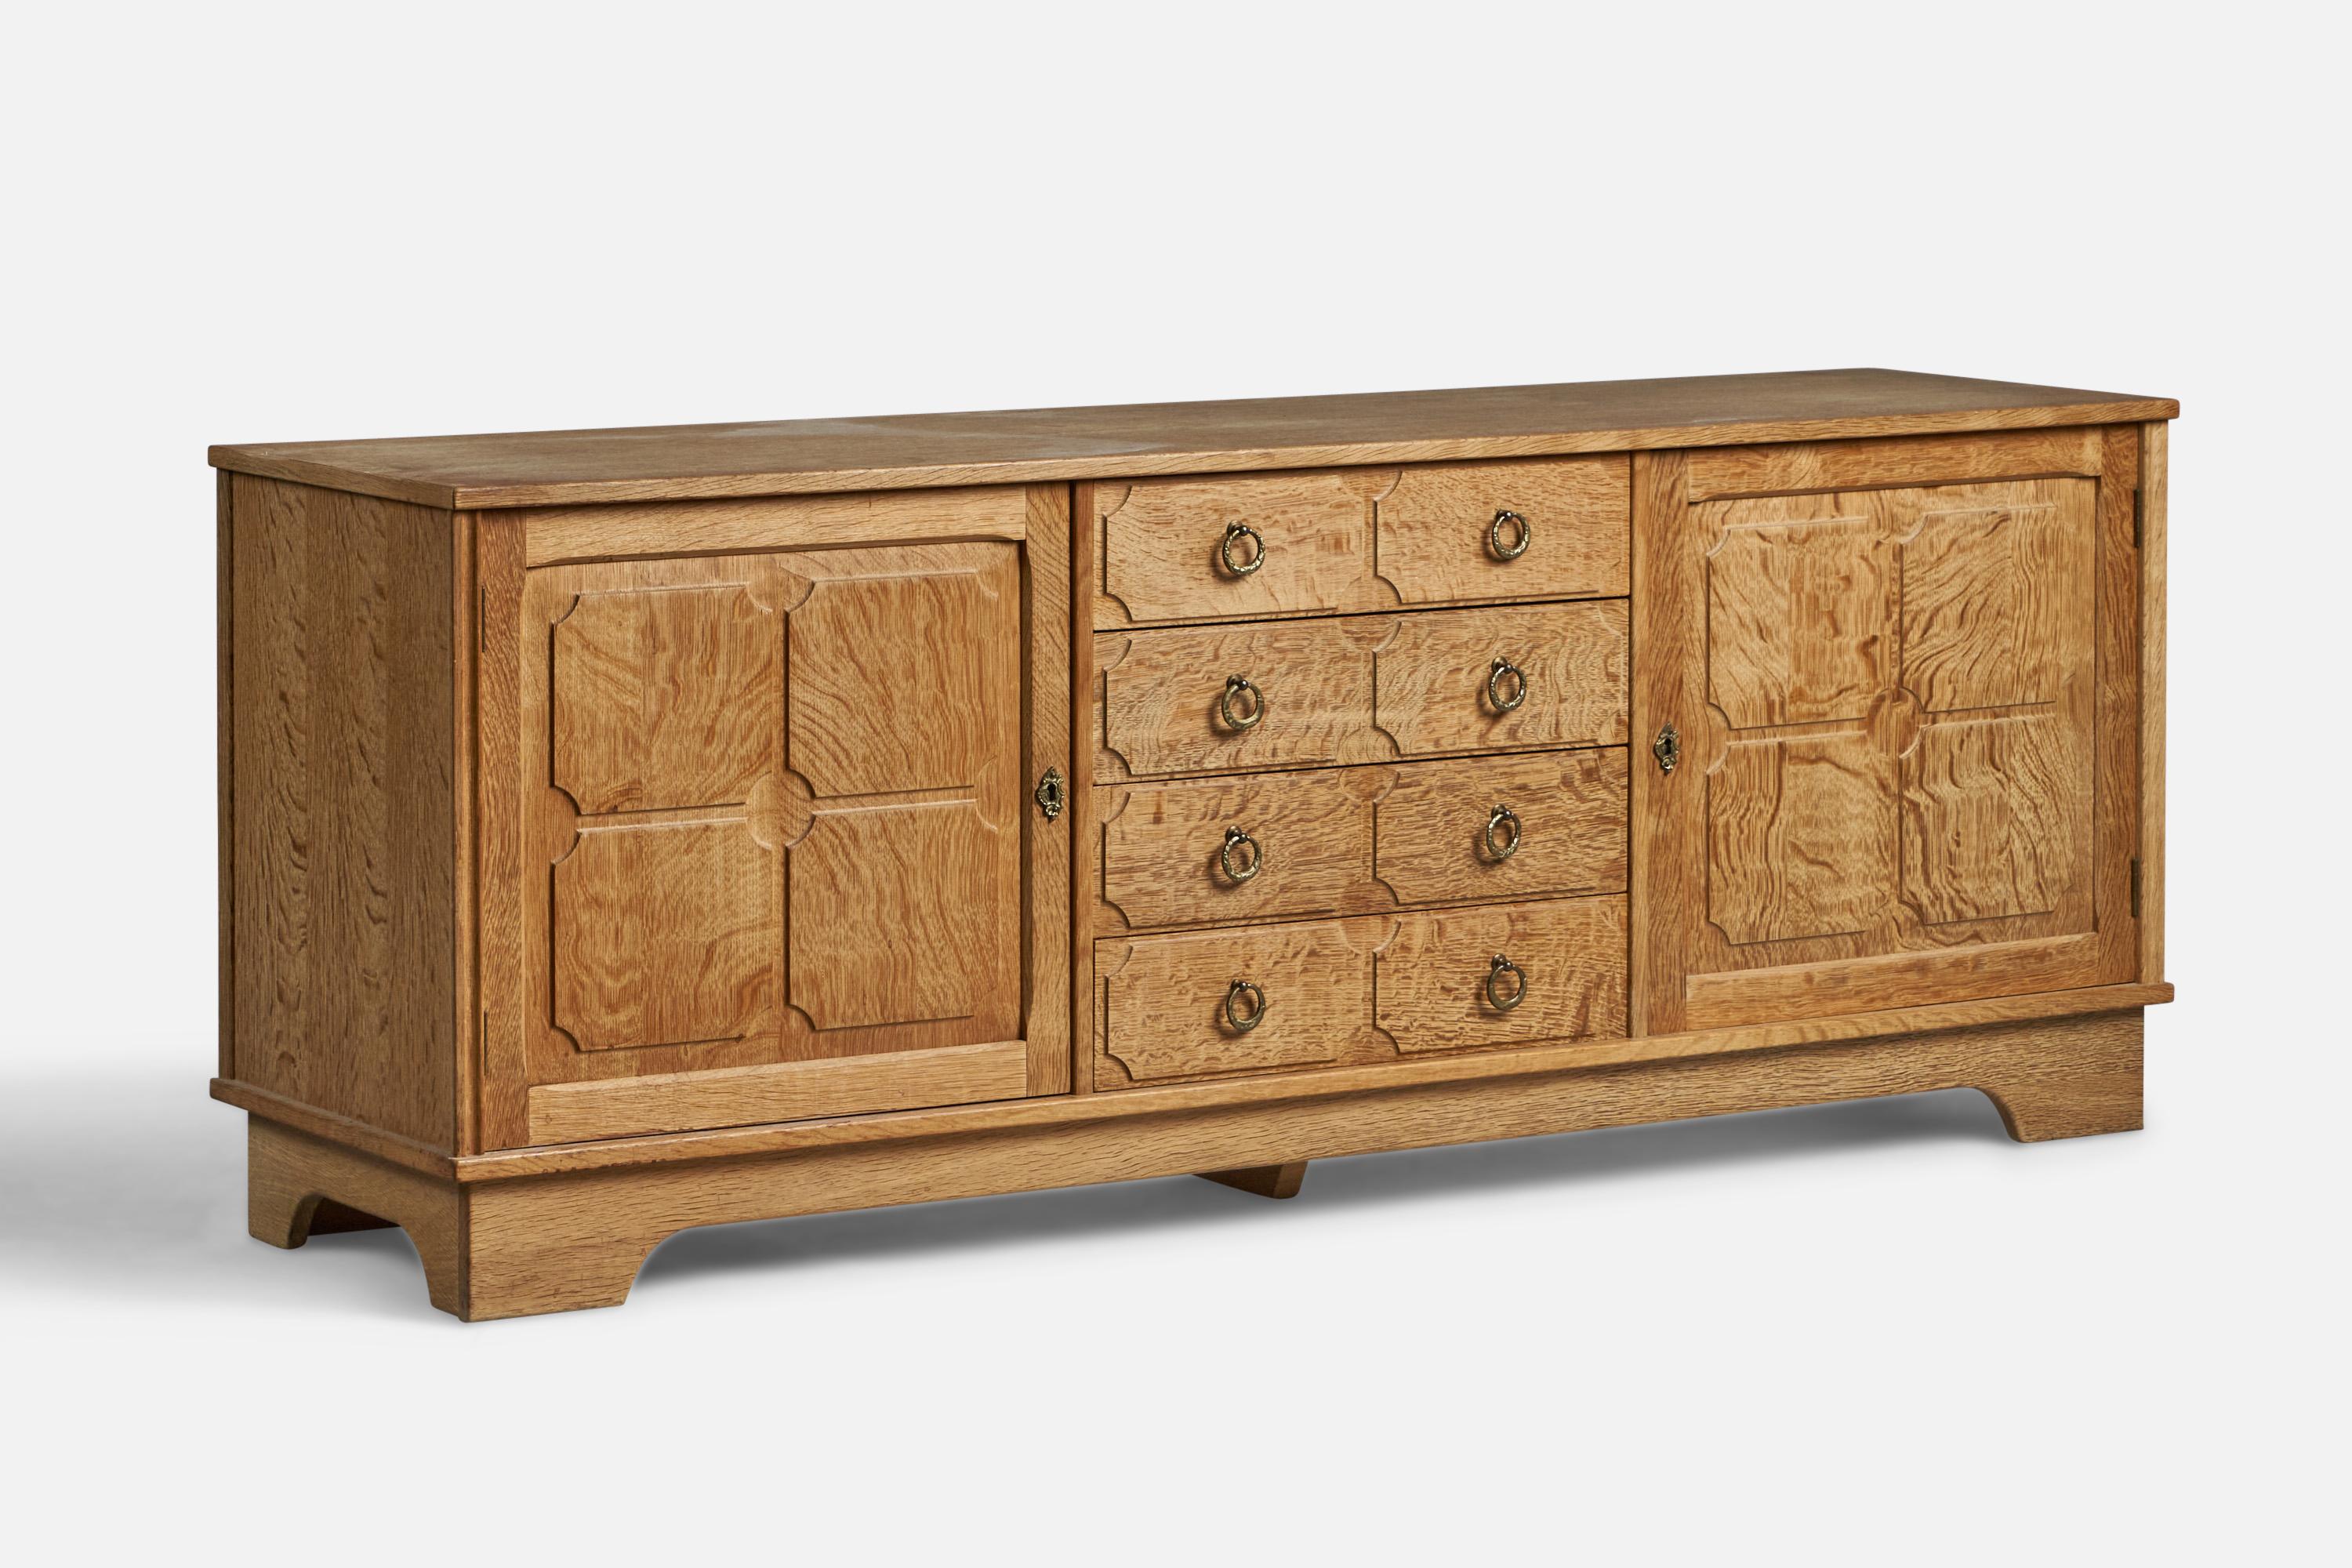 An oak and brass cabinet or sideboard designed and produced in Denmark, 1940s.